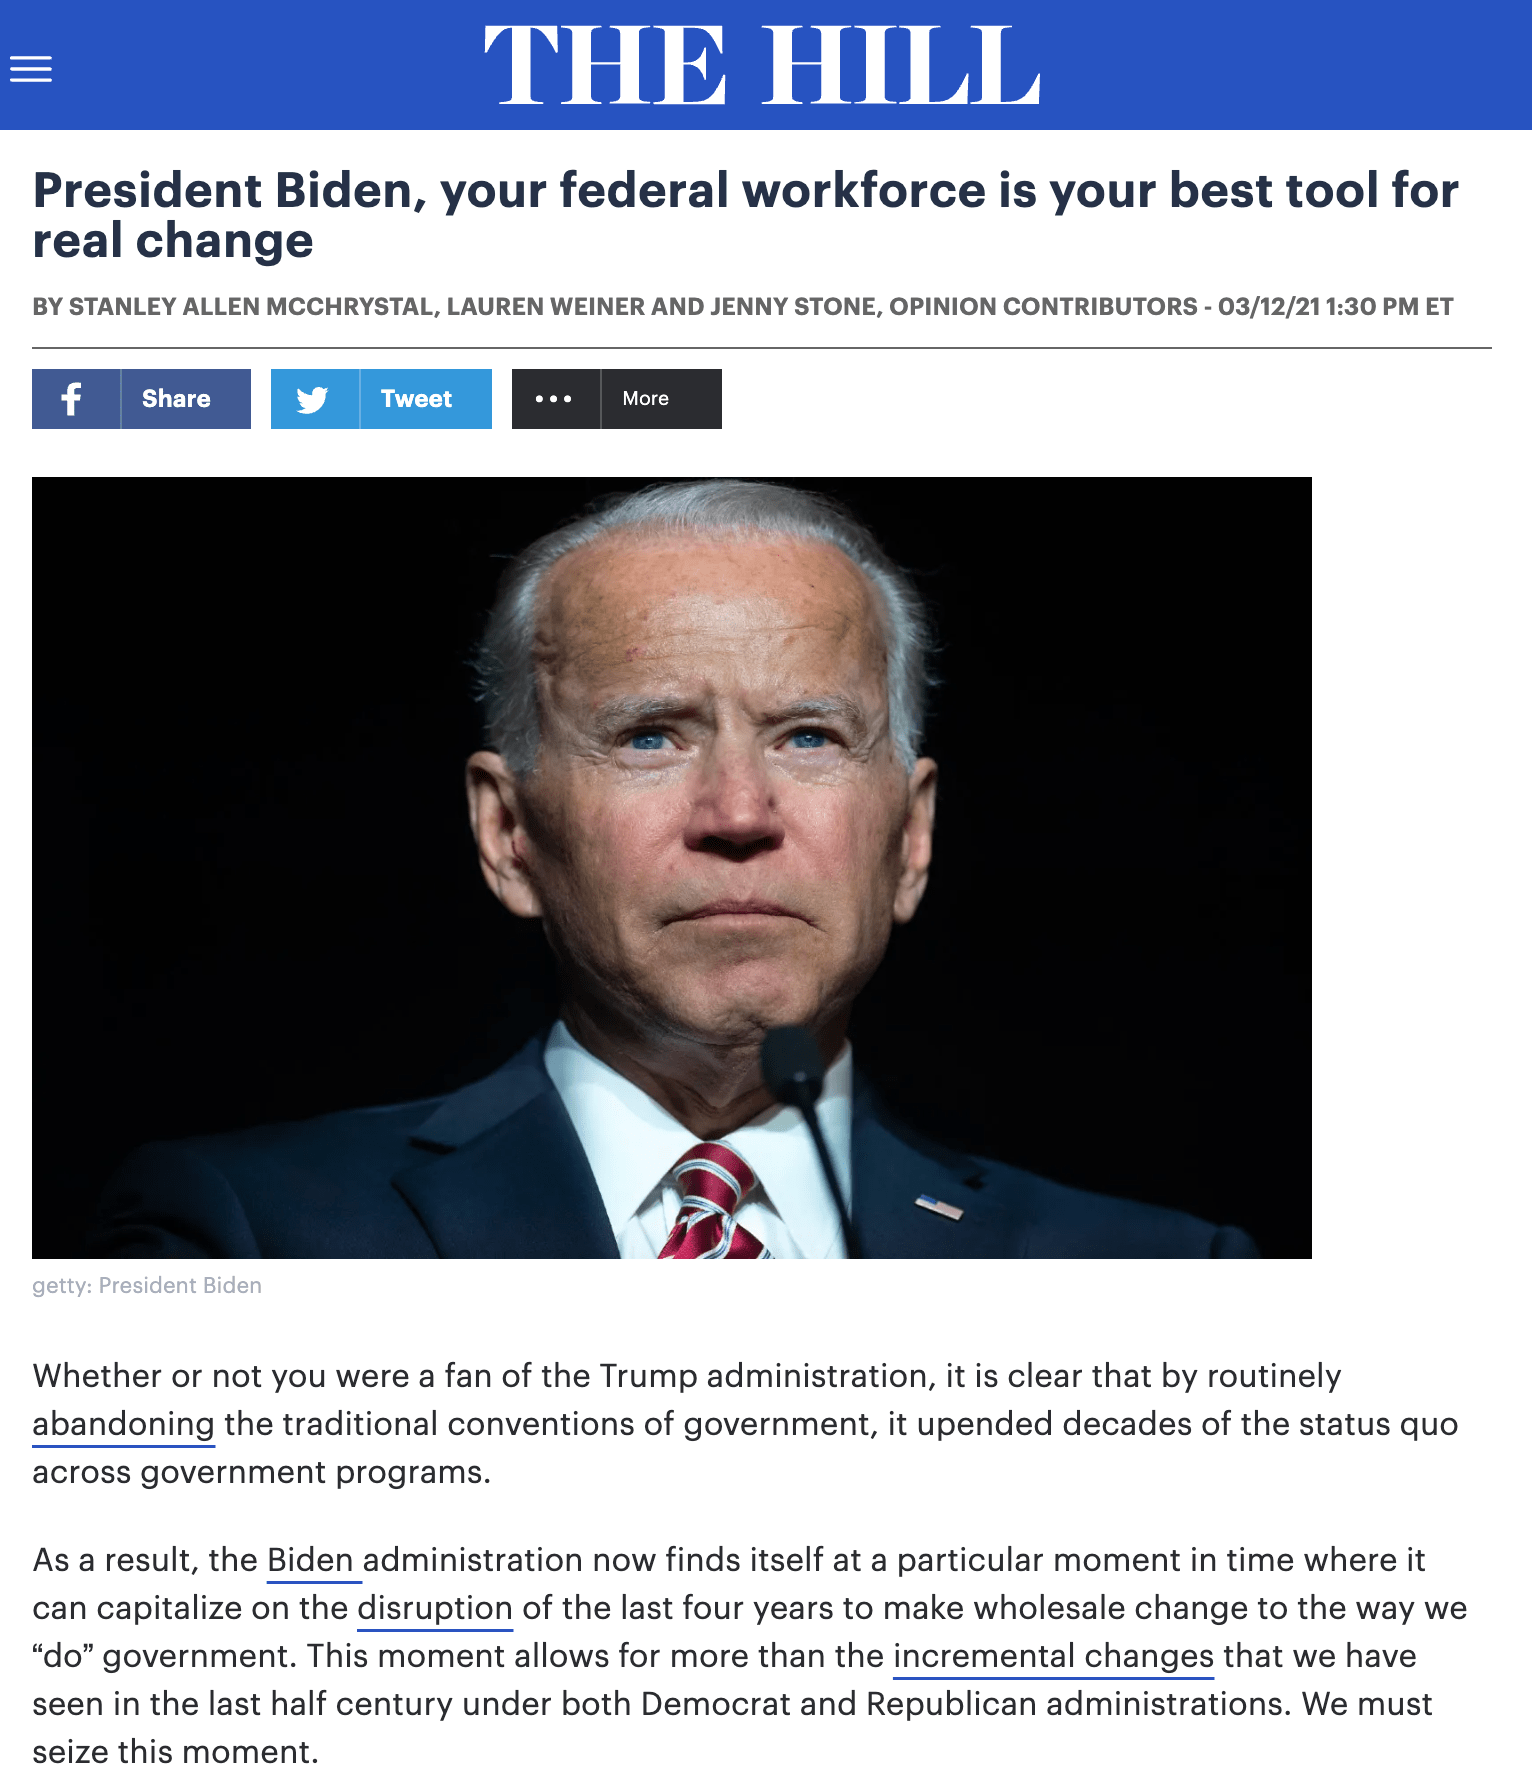 President Biden, your federal workforce is your best tool for real change